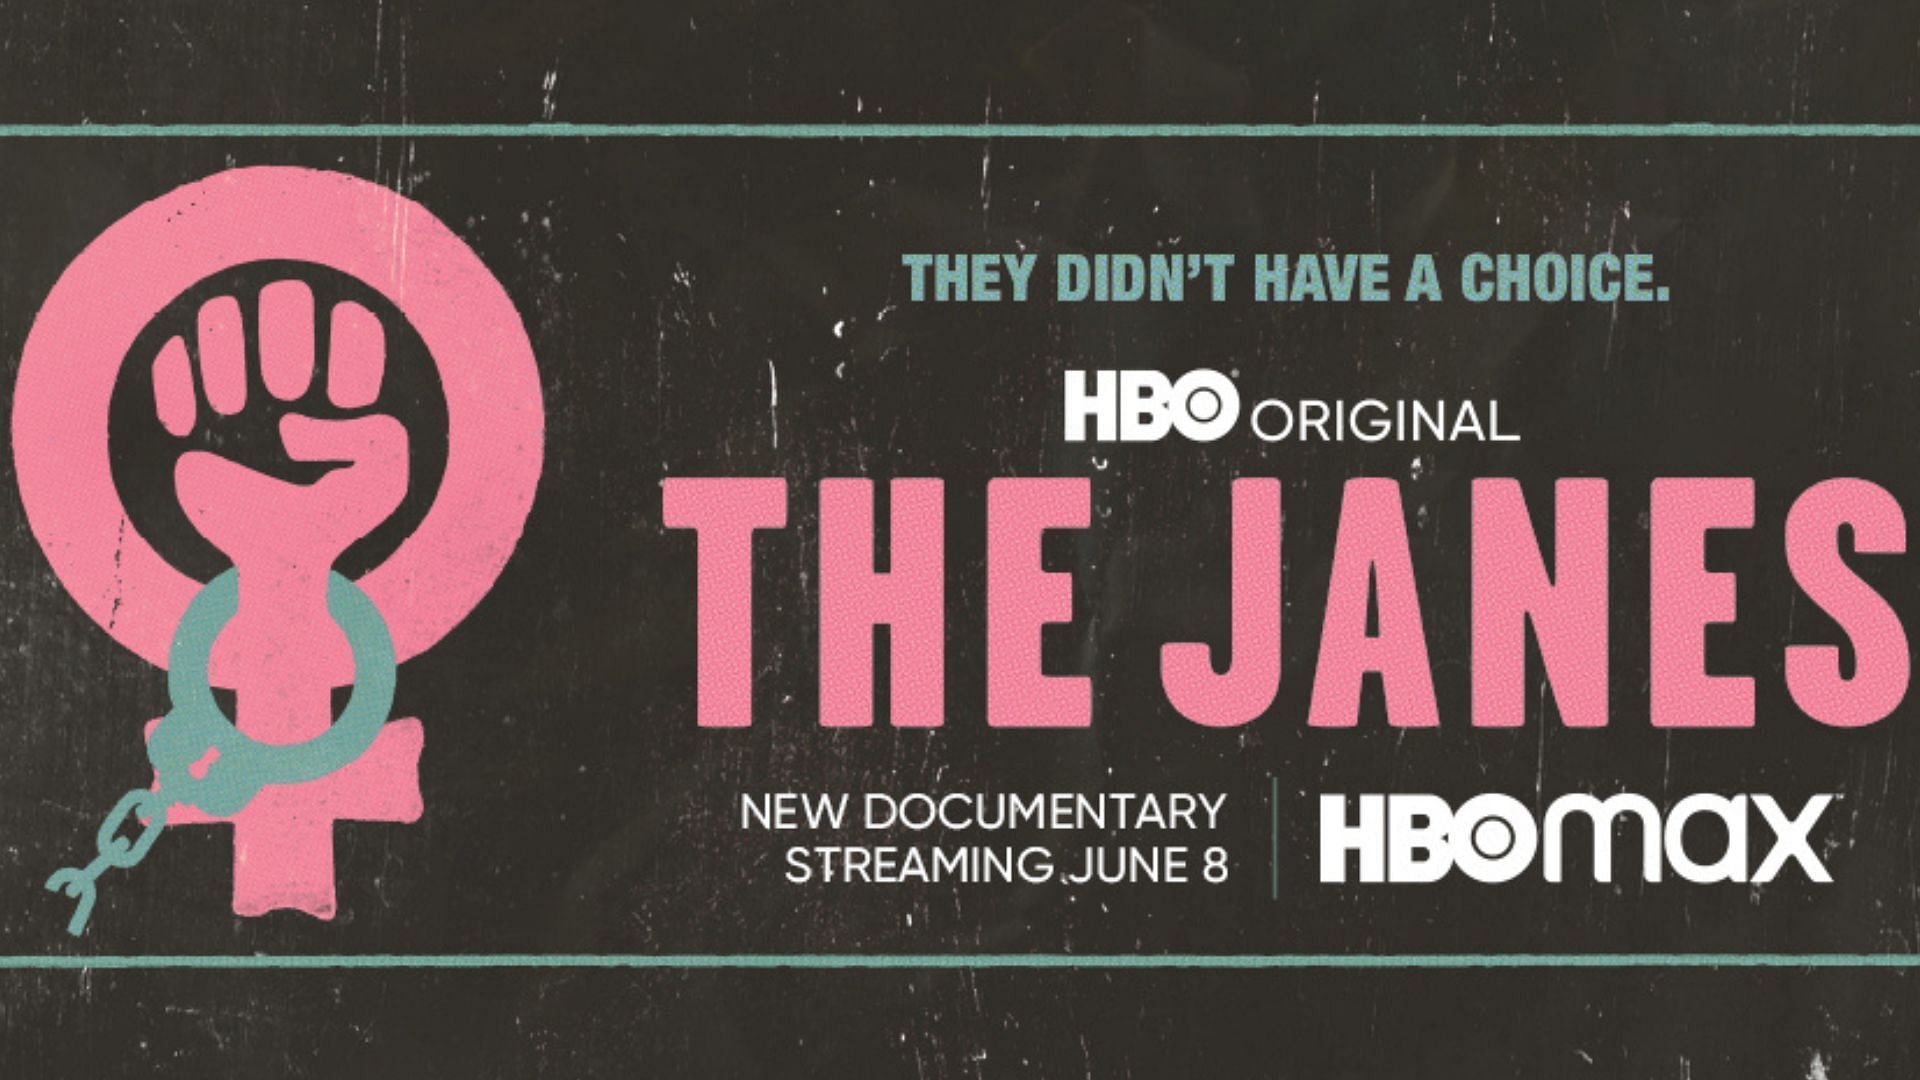 HBO&#039;s upcoming documentary The Janes set to premiere on June 8, 2022 (Image via @HBODocs/Twitter)